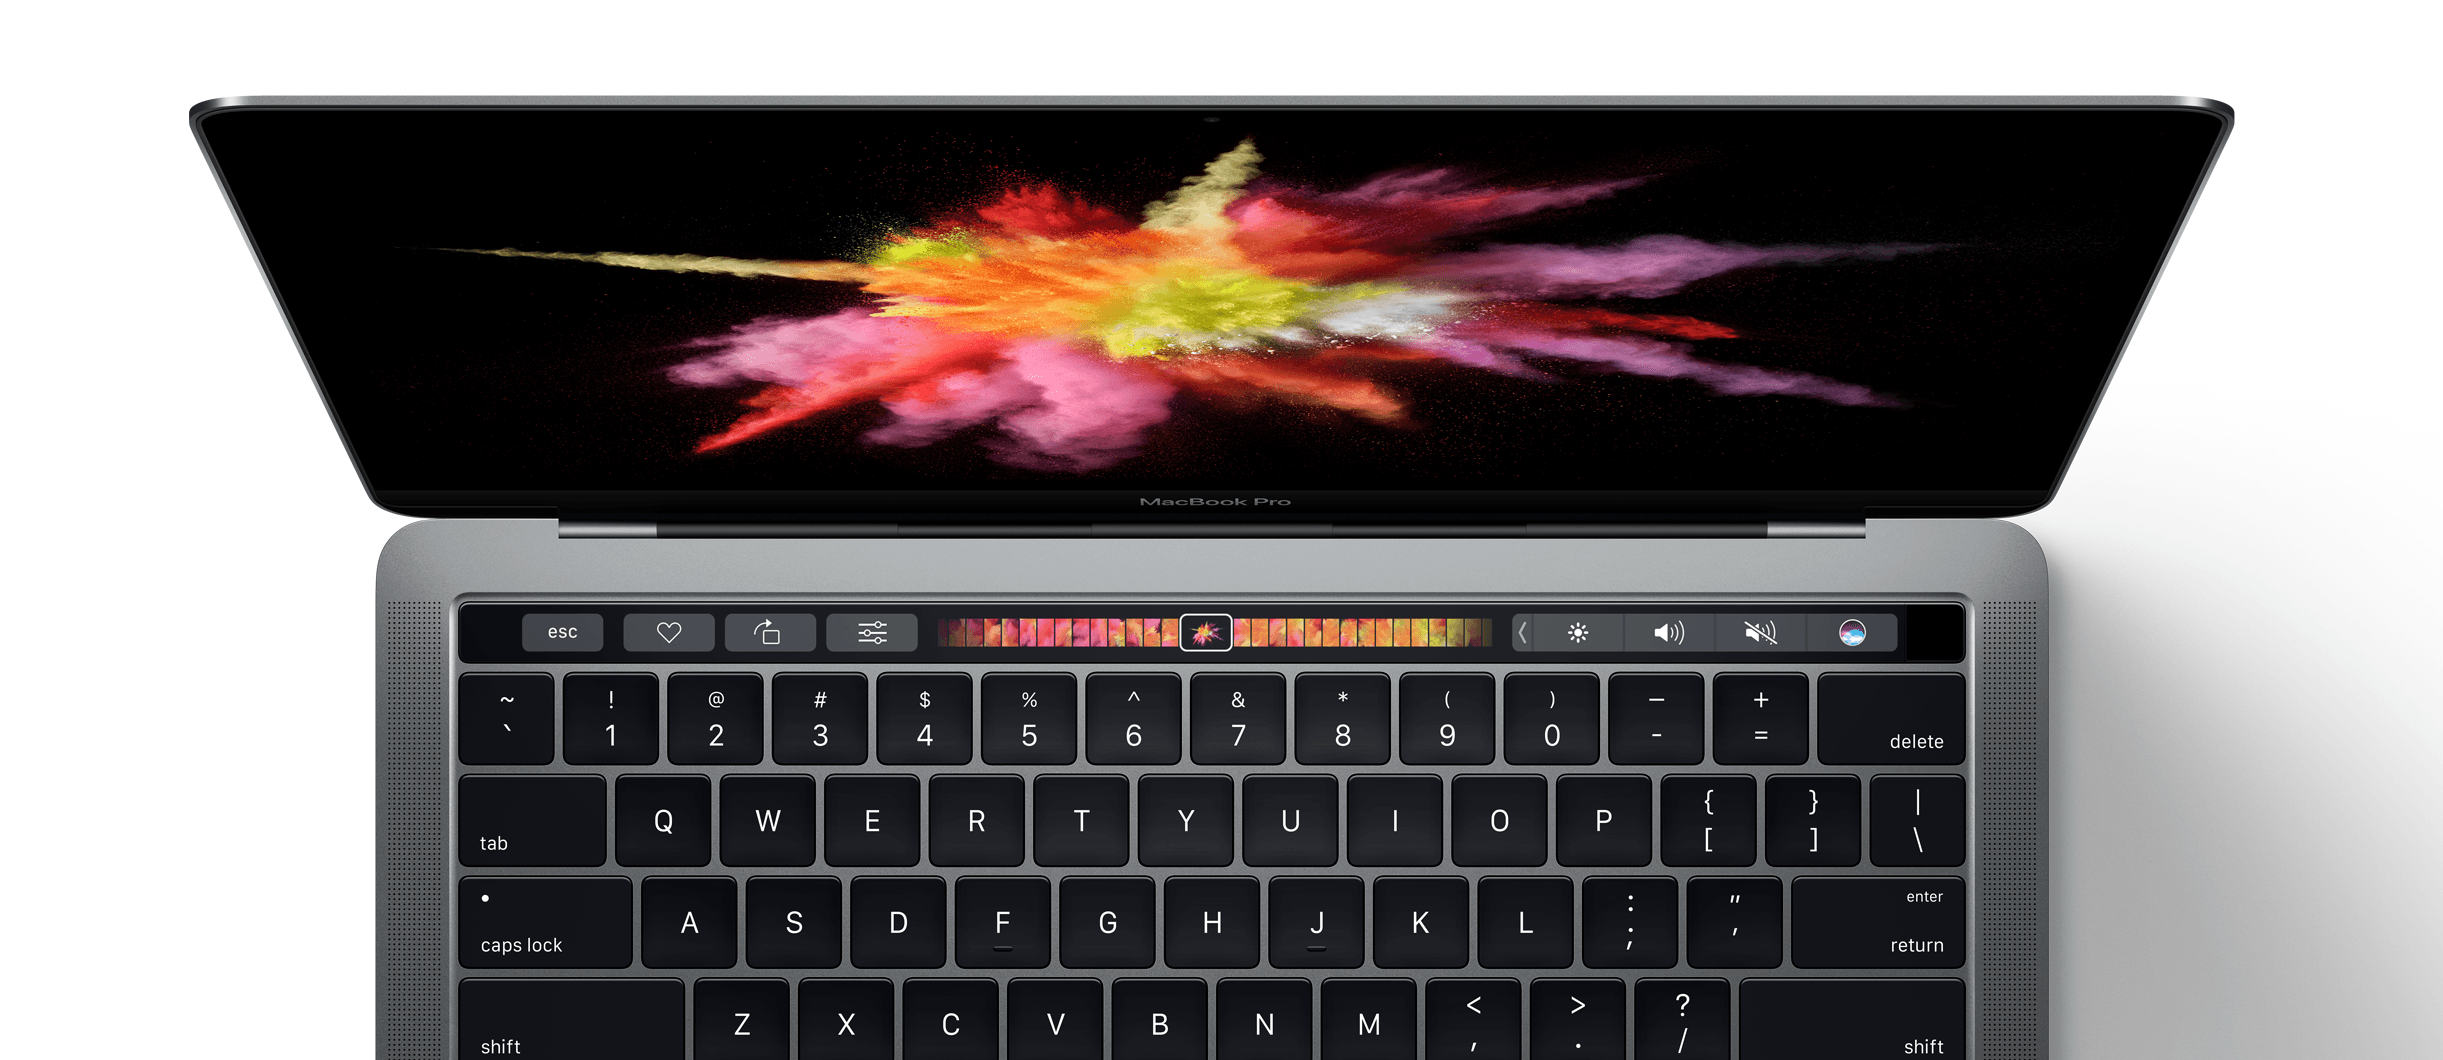 What is the latest version of macos for macbook pro 2017